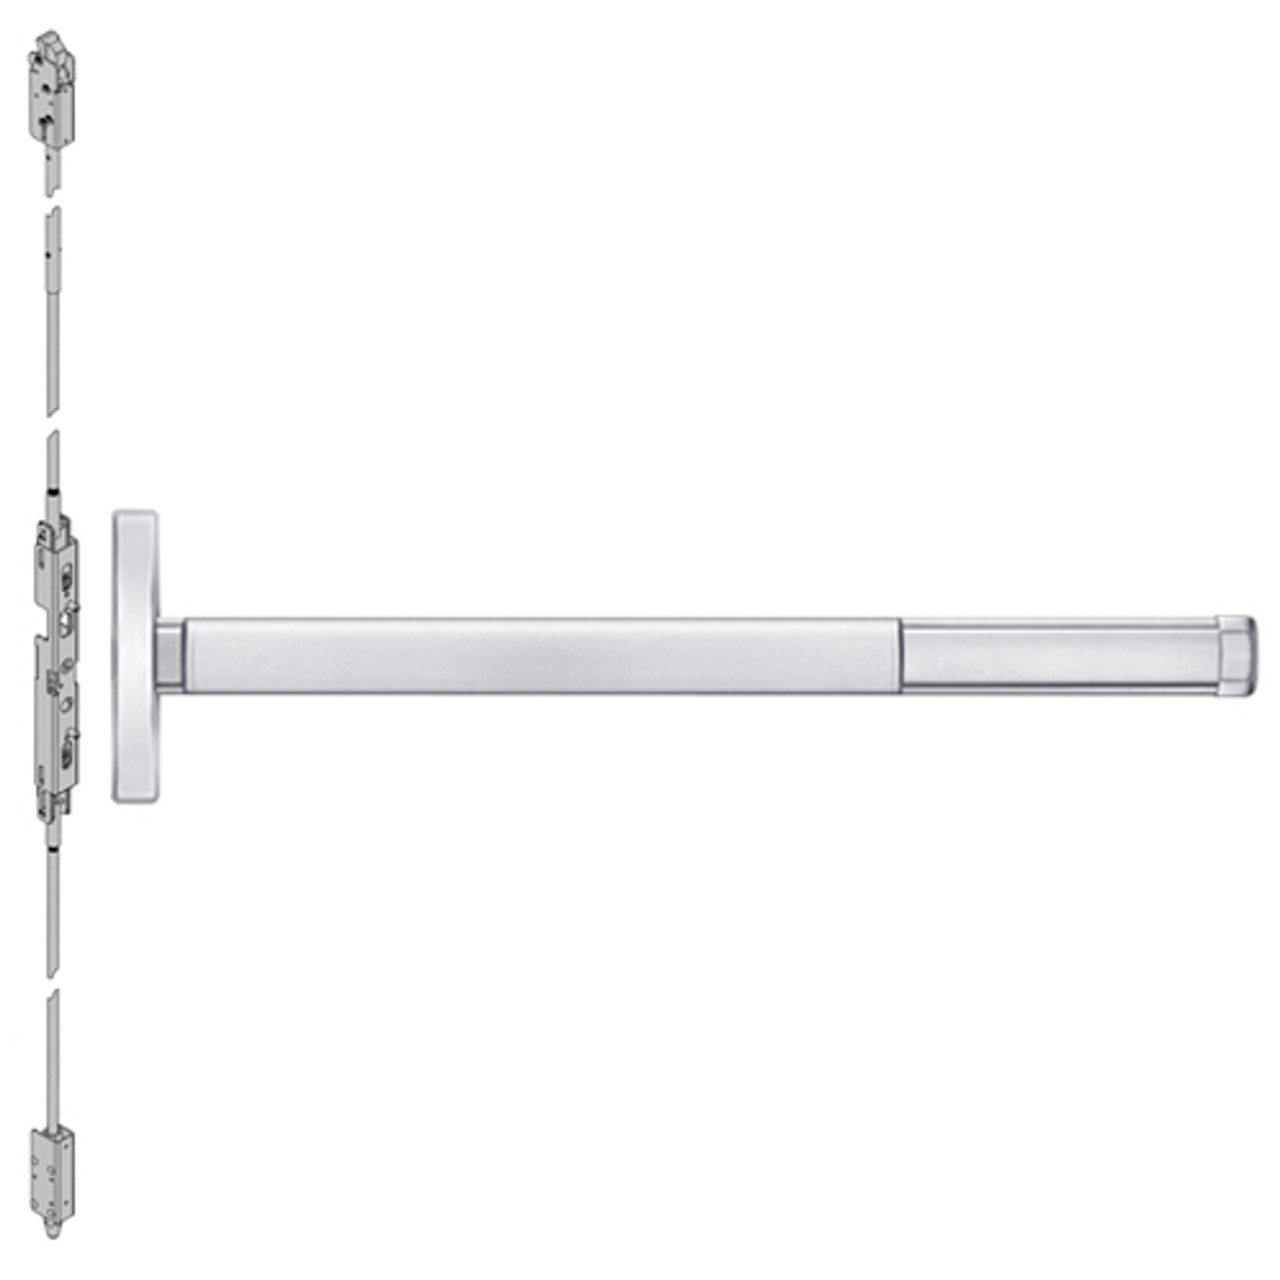 DE2601-625-48 PHI 2600 Series Concealed Vertical Rod Exit Device with Delayed Egress Prepped for Cover Plate in Bright Chrome Finish